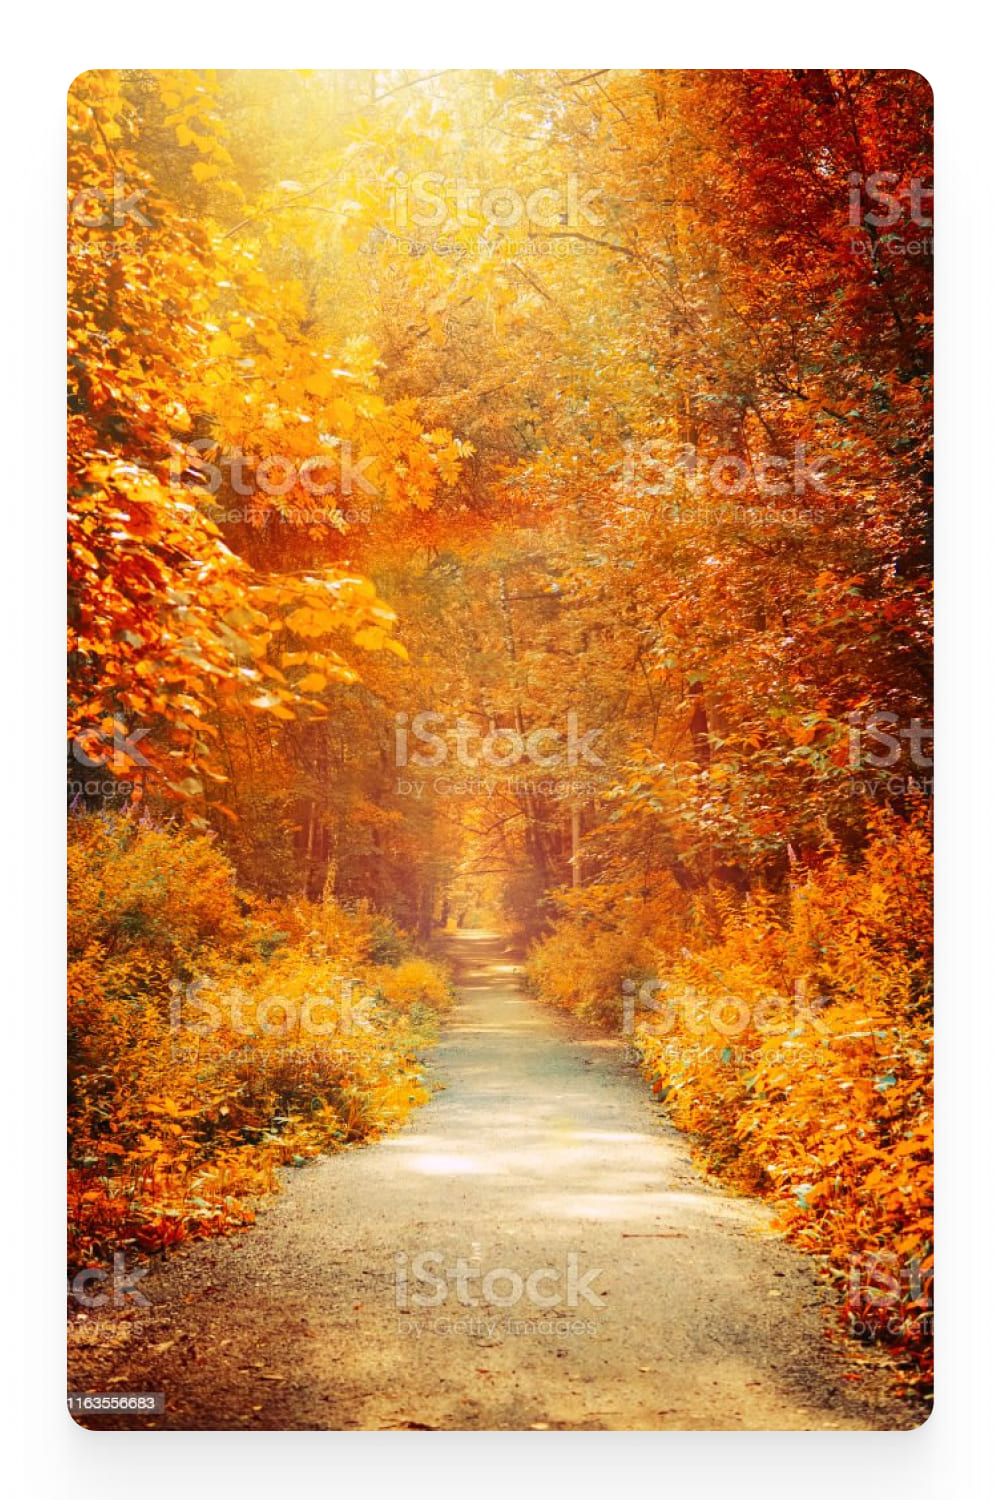 Photo of a path in the autumn forest.